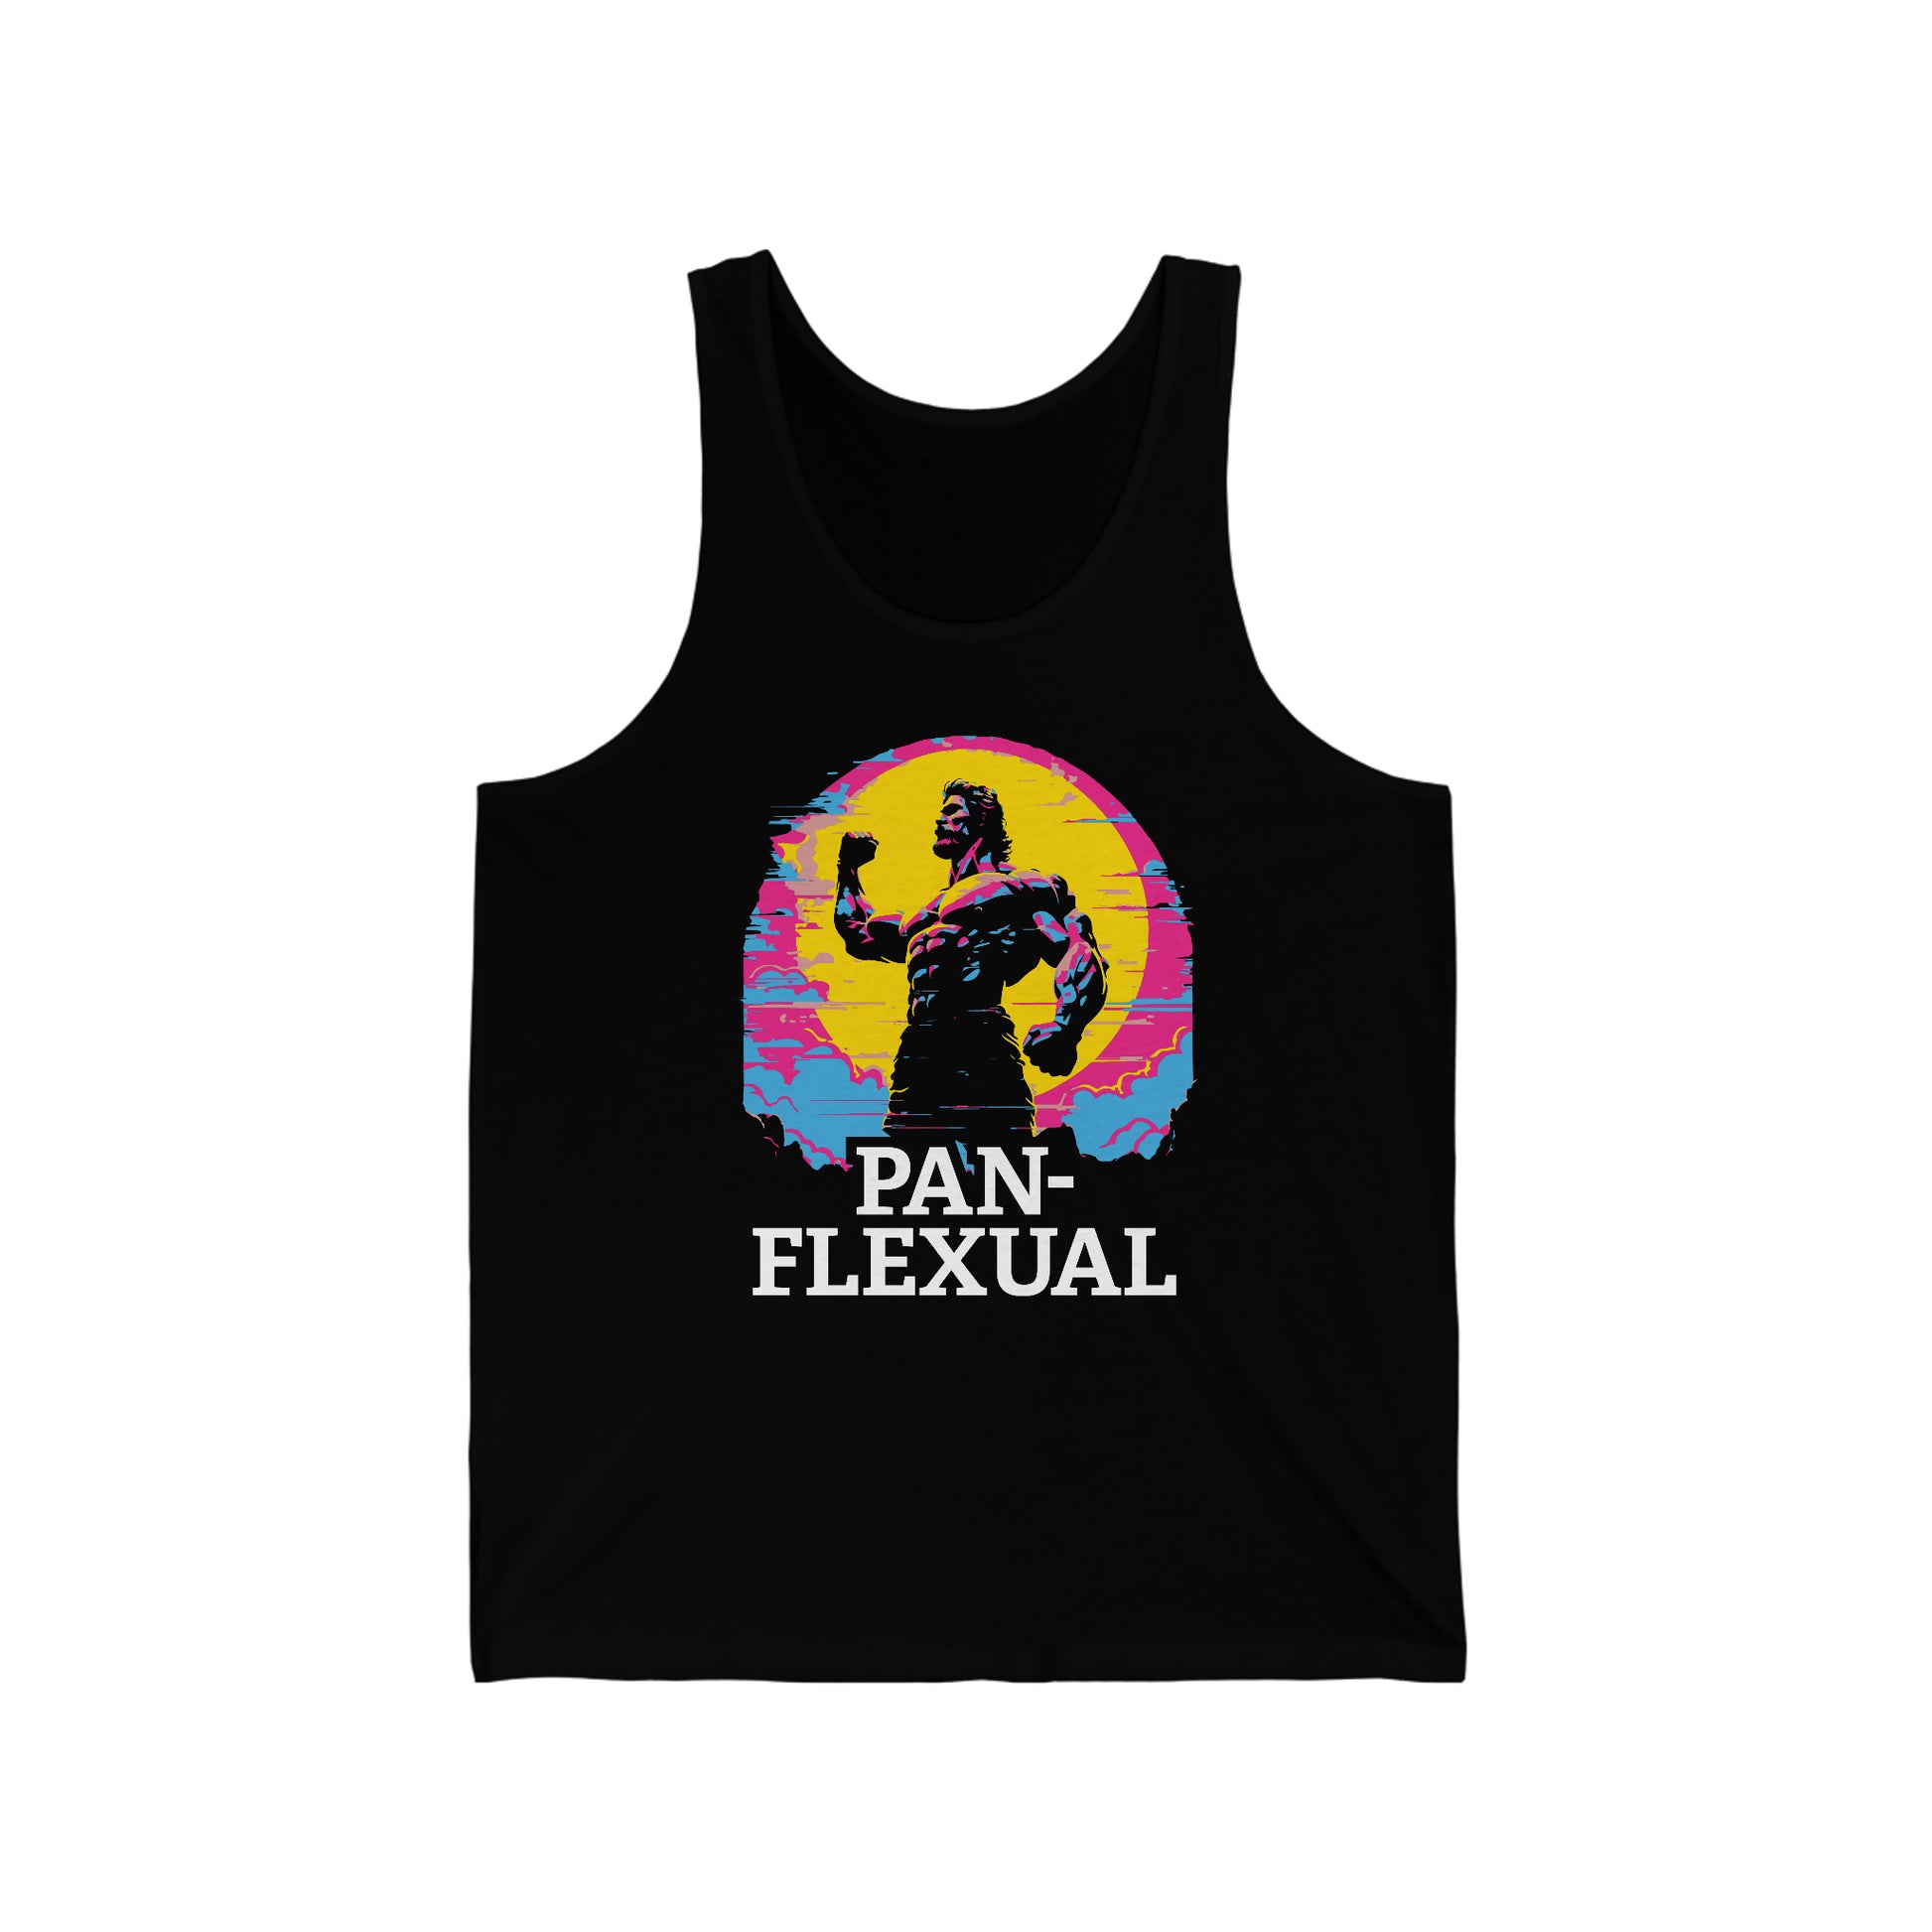 Black tank top featuring a graphic with a muscled bodybuilder and the phrase "Pan-Flexual" on it.